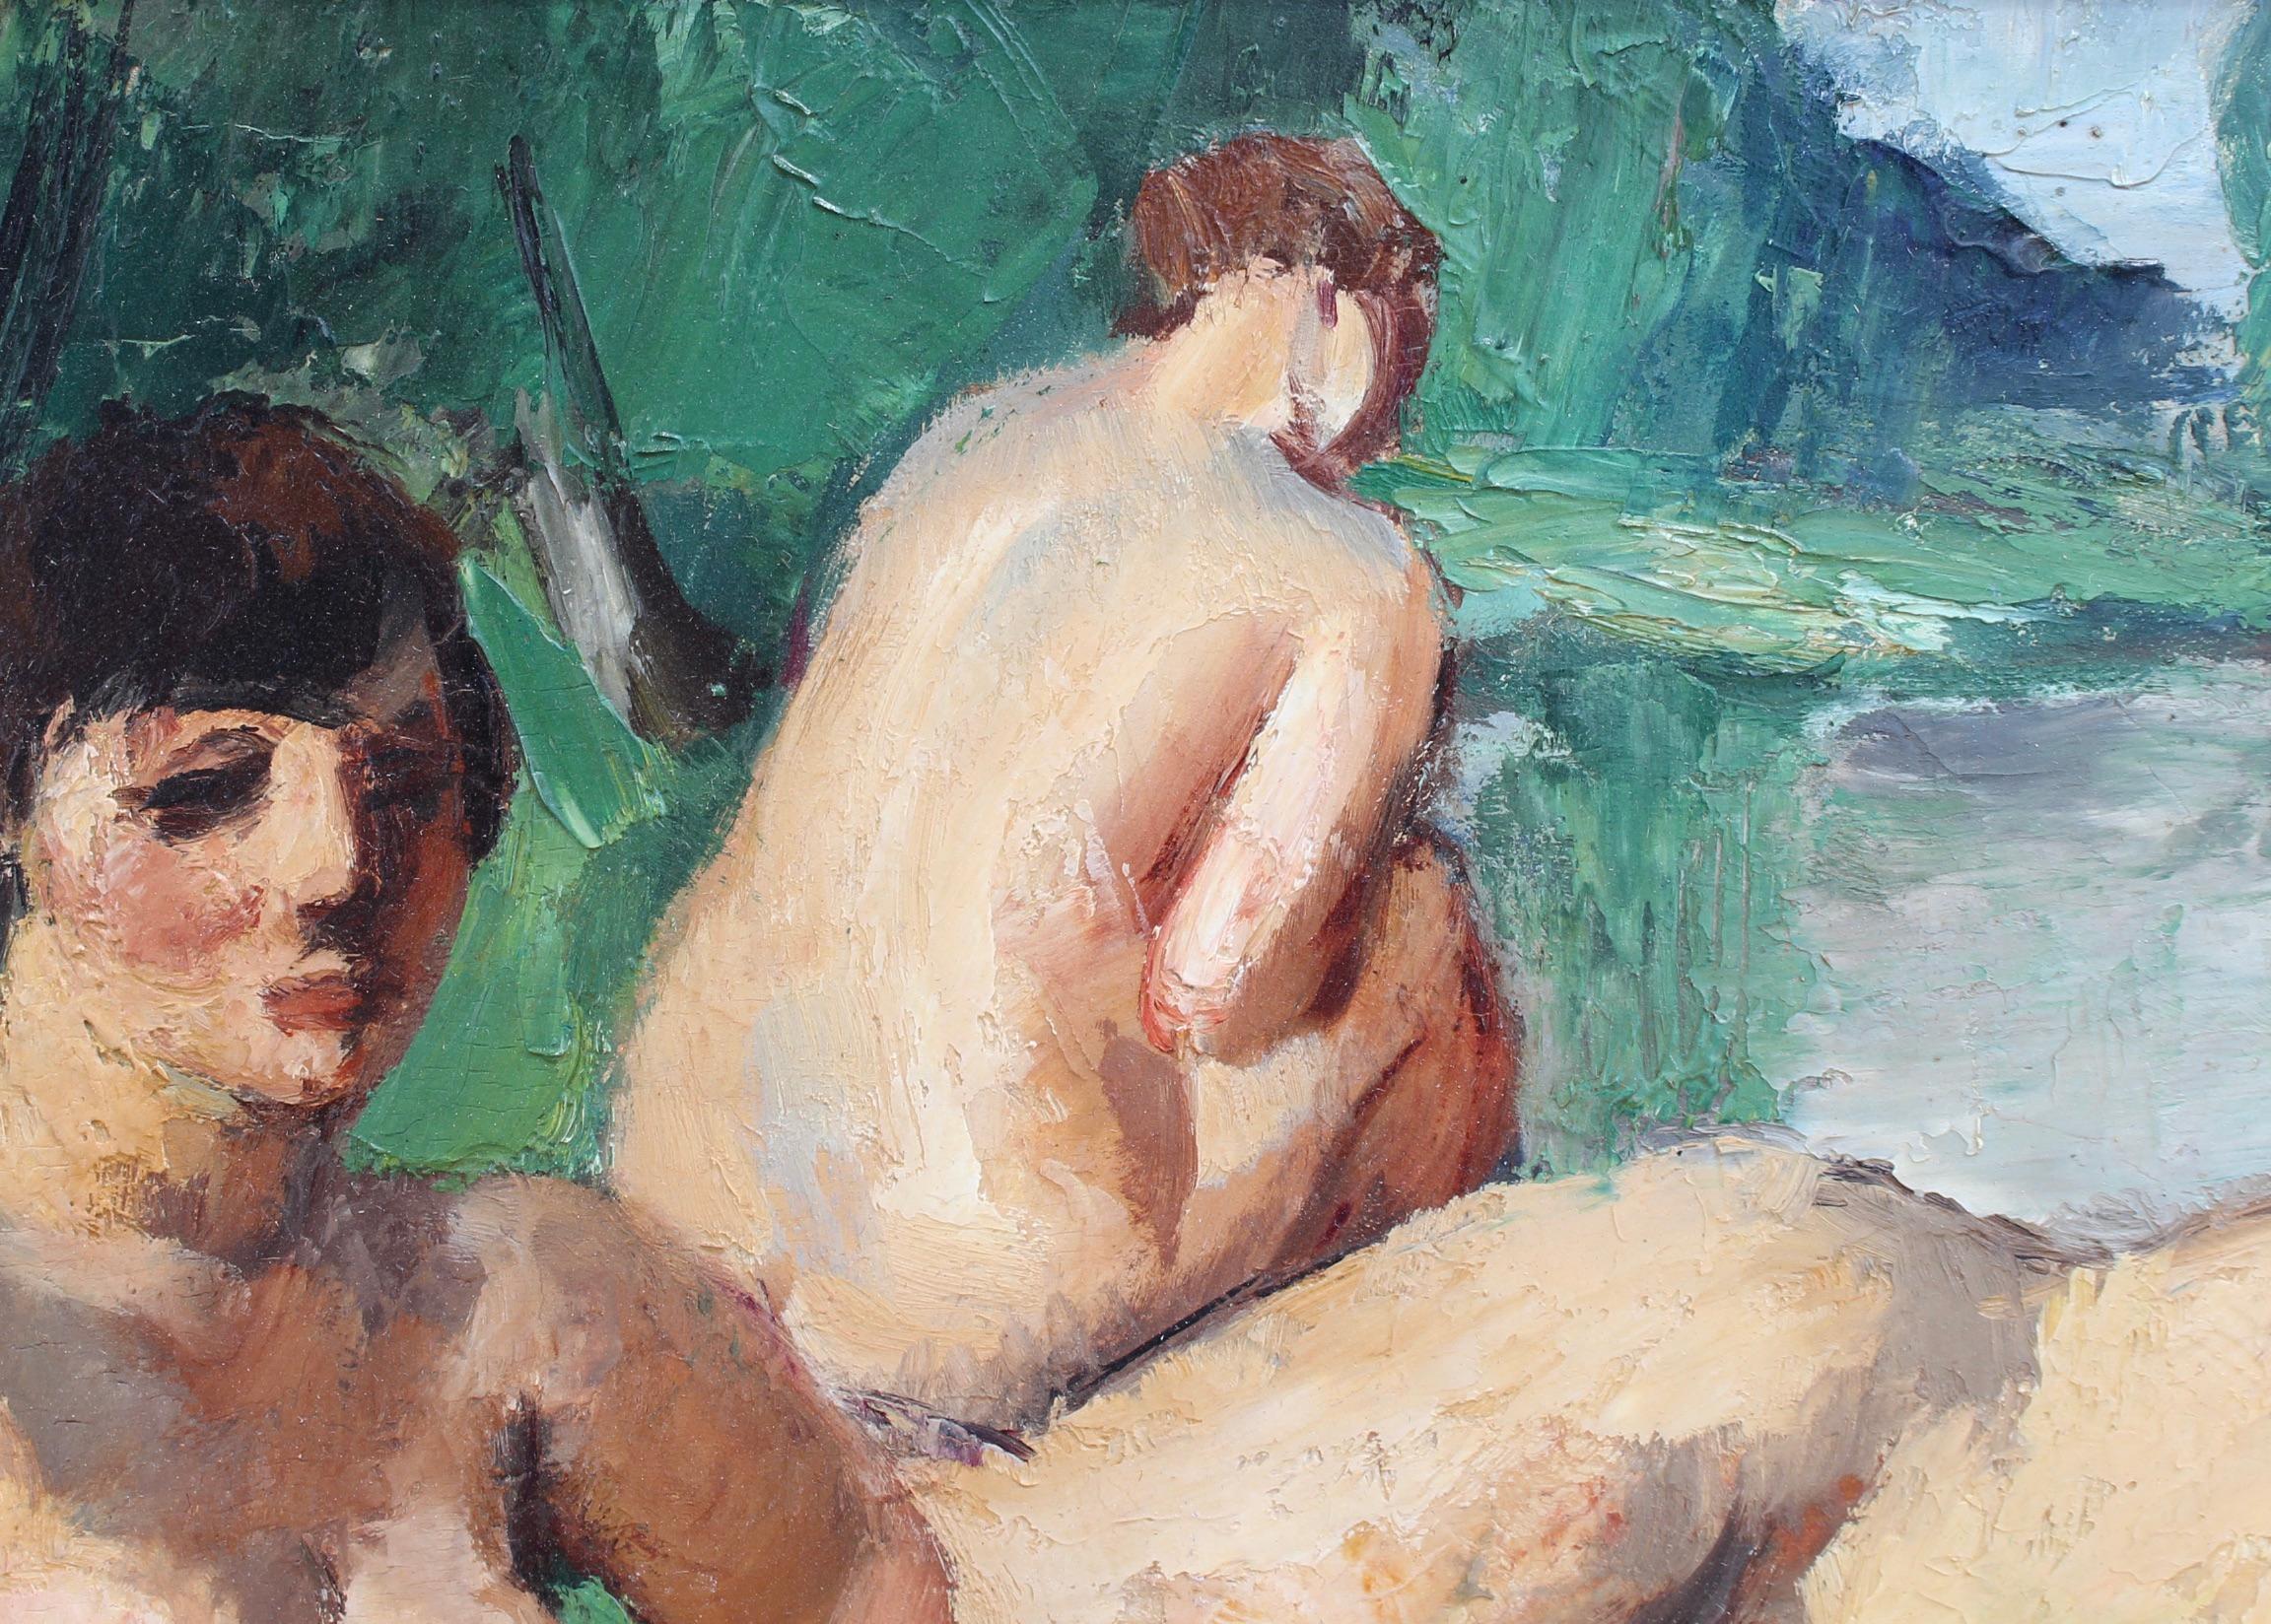 'The Bathers', oil on board, by Charles Kvapil (1927). The world of art has for centuries depicted bathers in one form or another. Kvapil's version, inspired by Courbet and Cézanne, is wonderfully alluring. Three nudes appear in a dreamy state